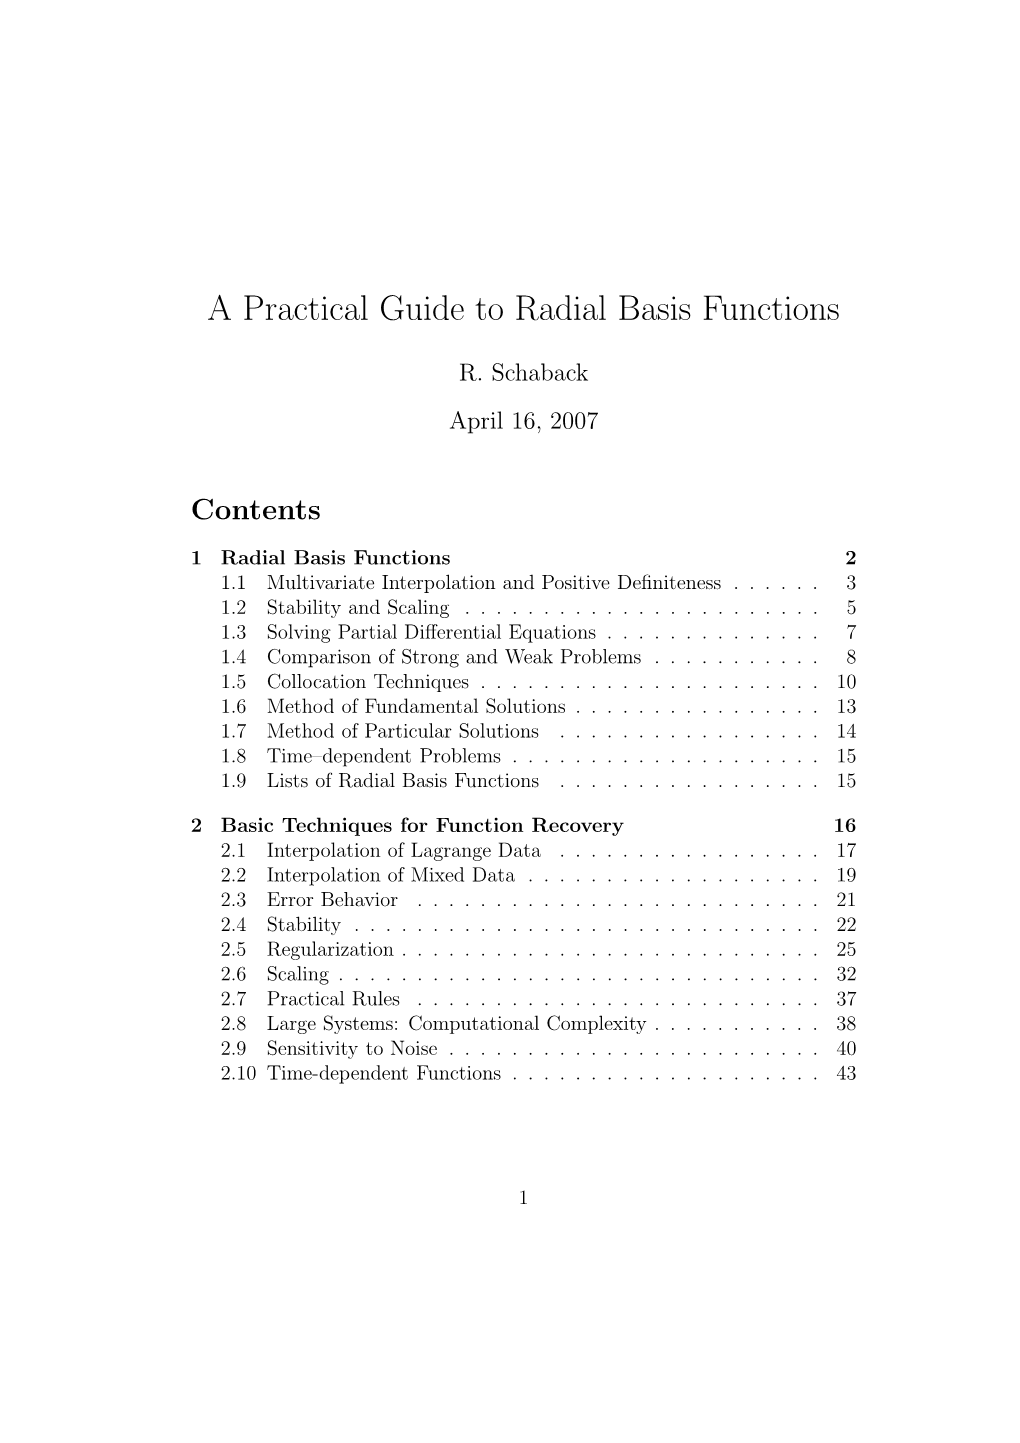 A Practical Guide to Radial Basis Functions